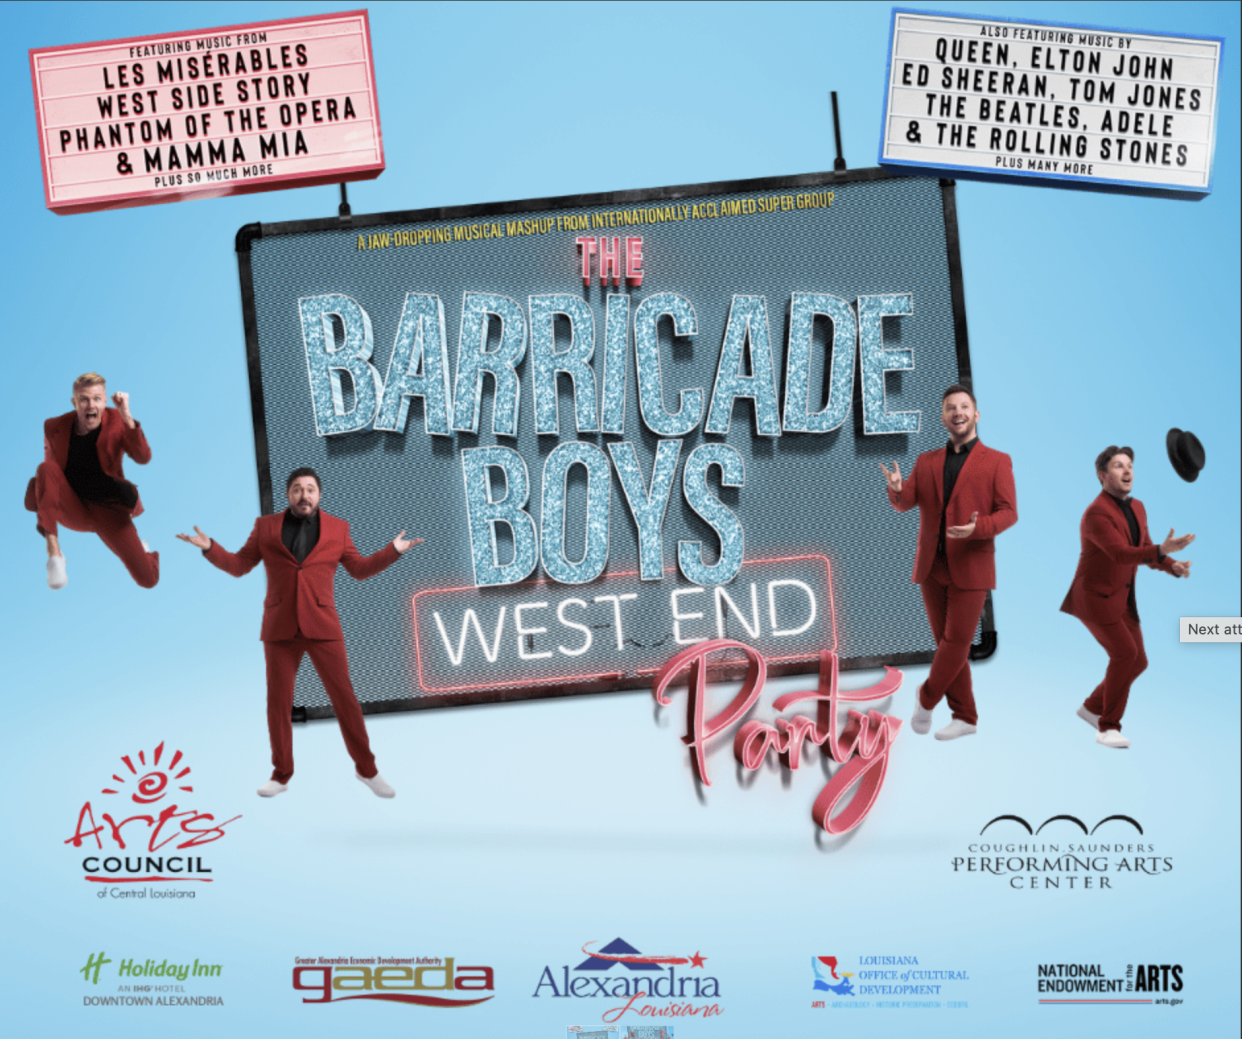 London’s West End is coming to downtown Alexandria when “The Barricade Boys” take the stage at the Coughlin-Saunders Performing Arts Center at 7:30 p.m. Saturday.